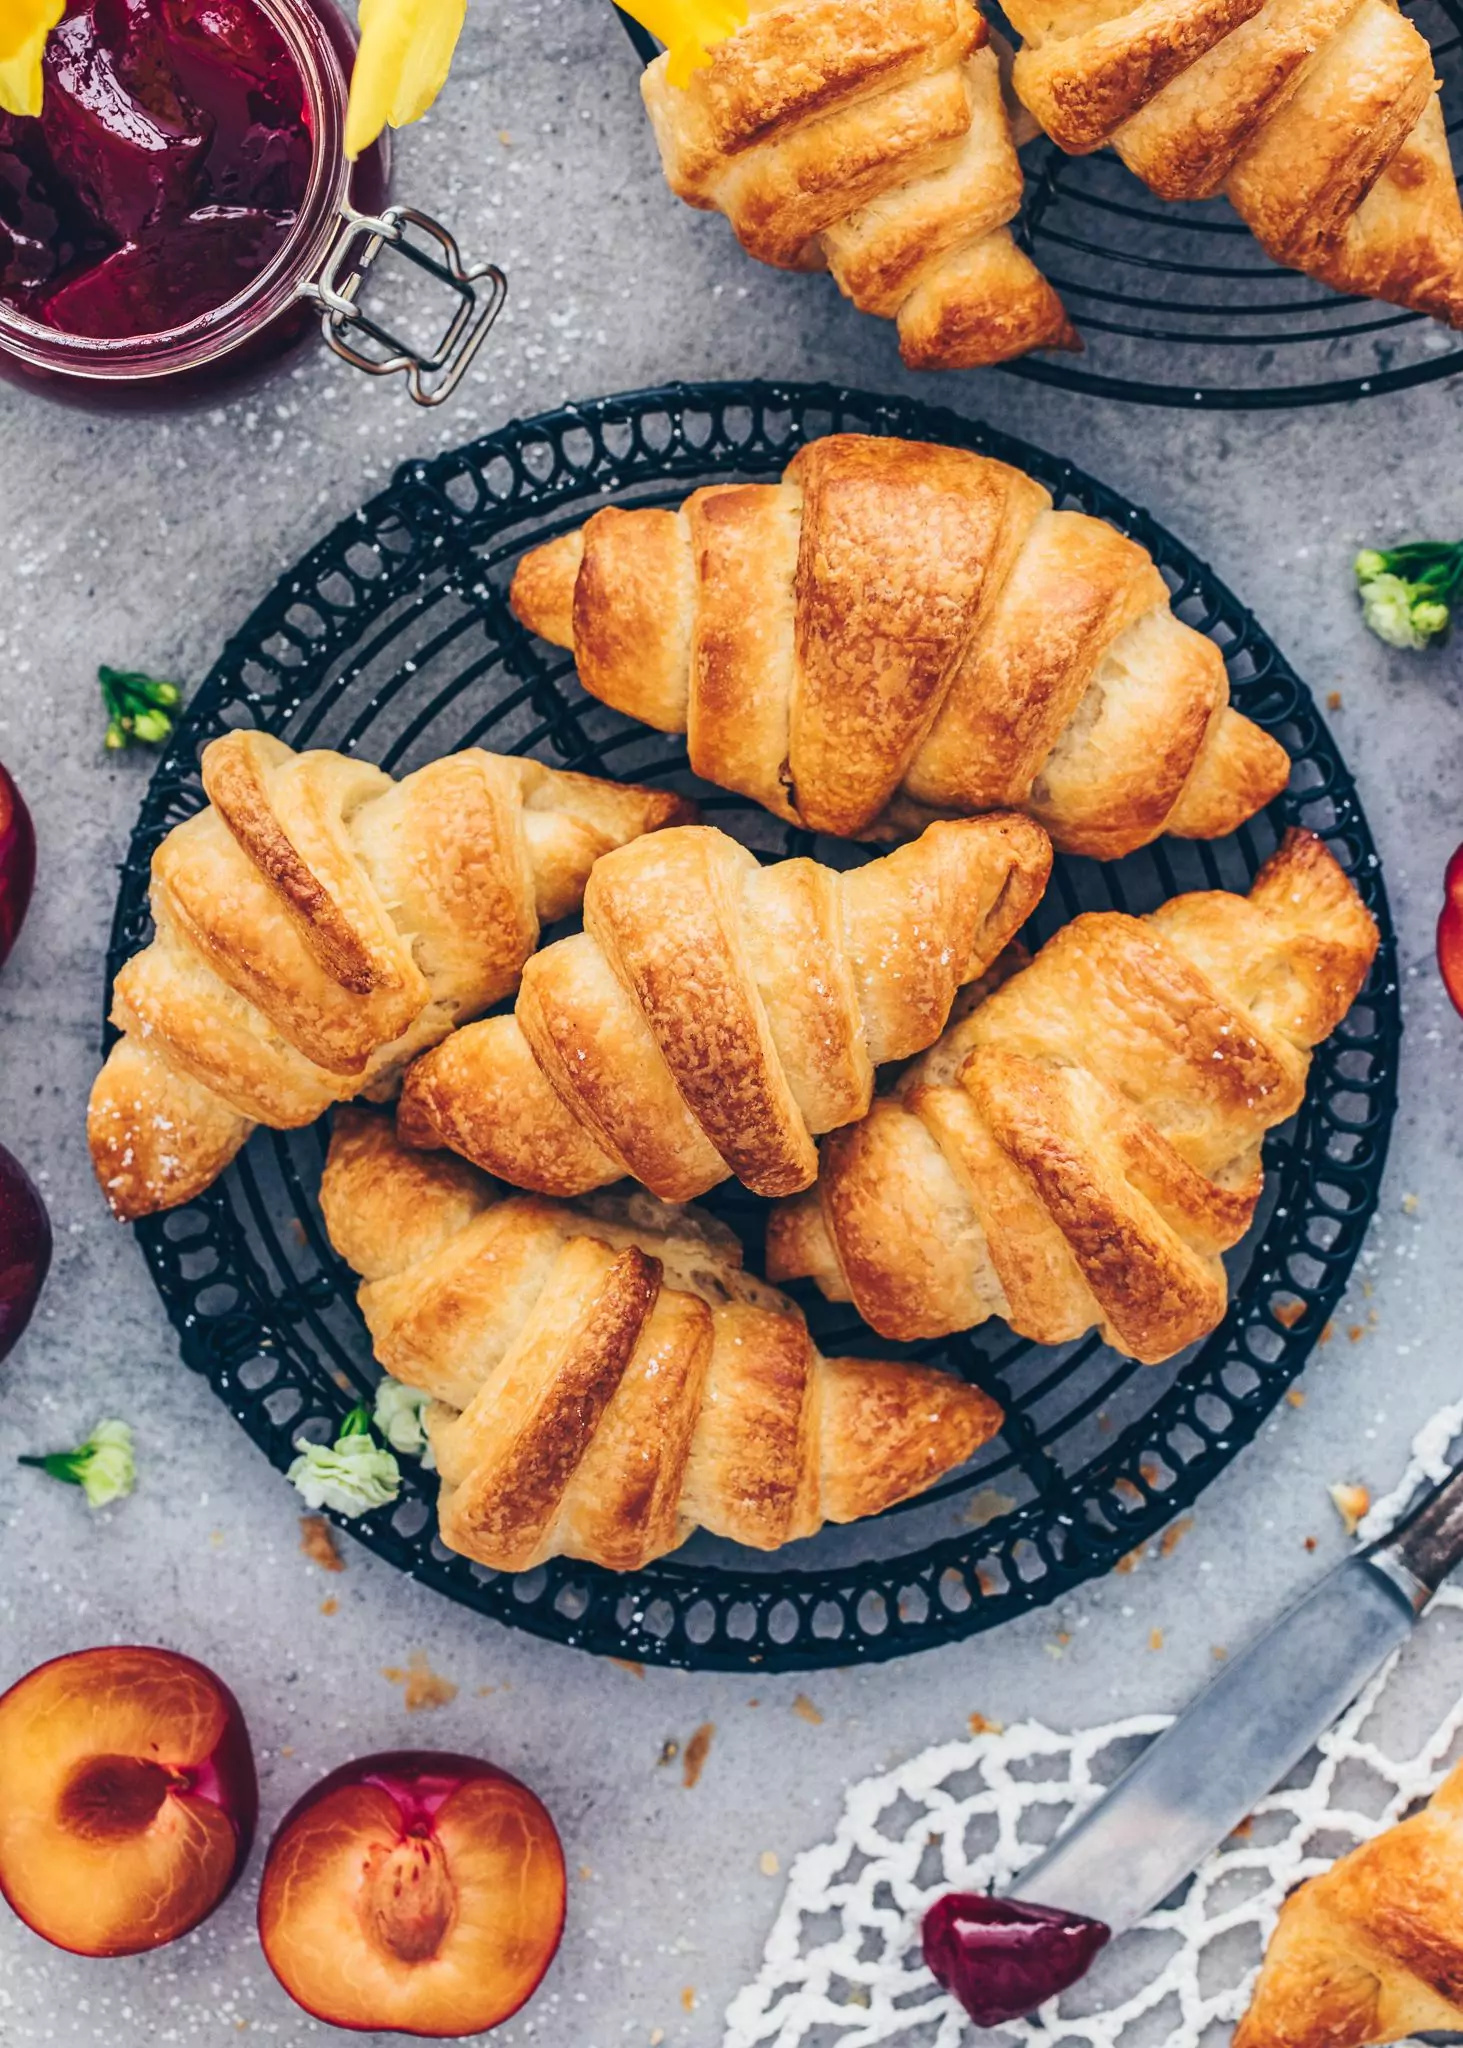 Croissant: The crescent shape is achieved by rolling the dough into a triangular shape. 1470x2050 HD Wallpaper.